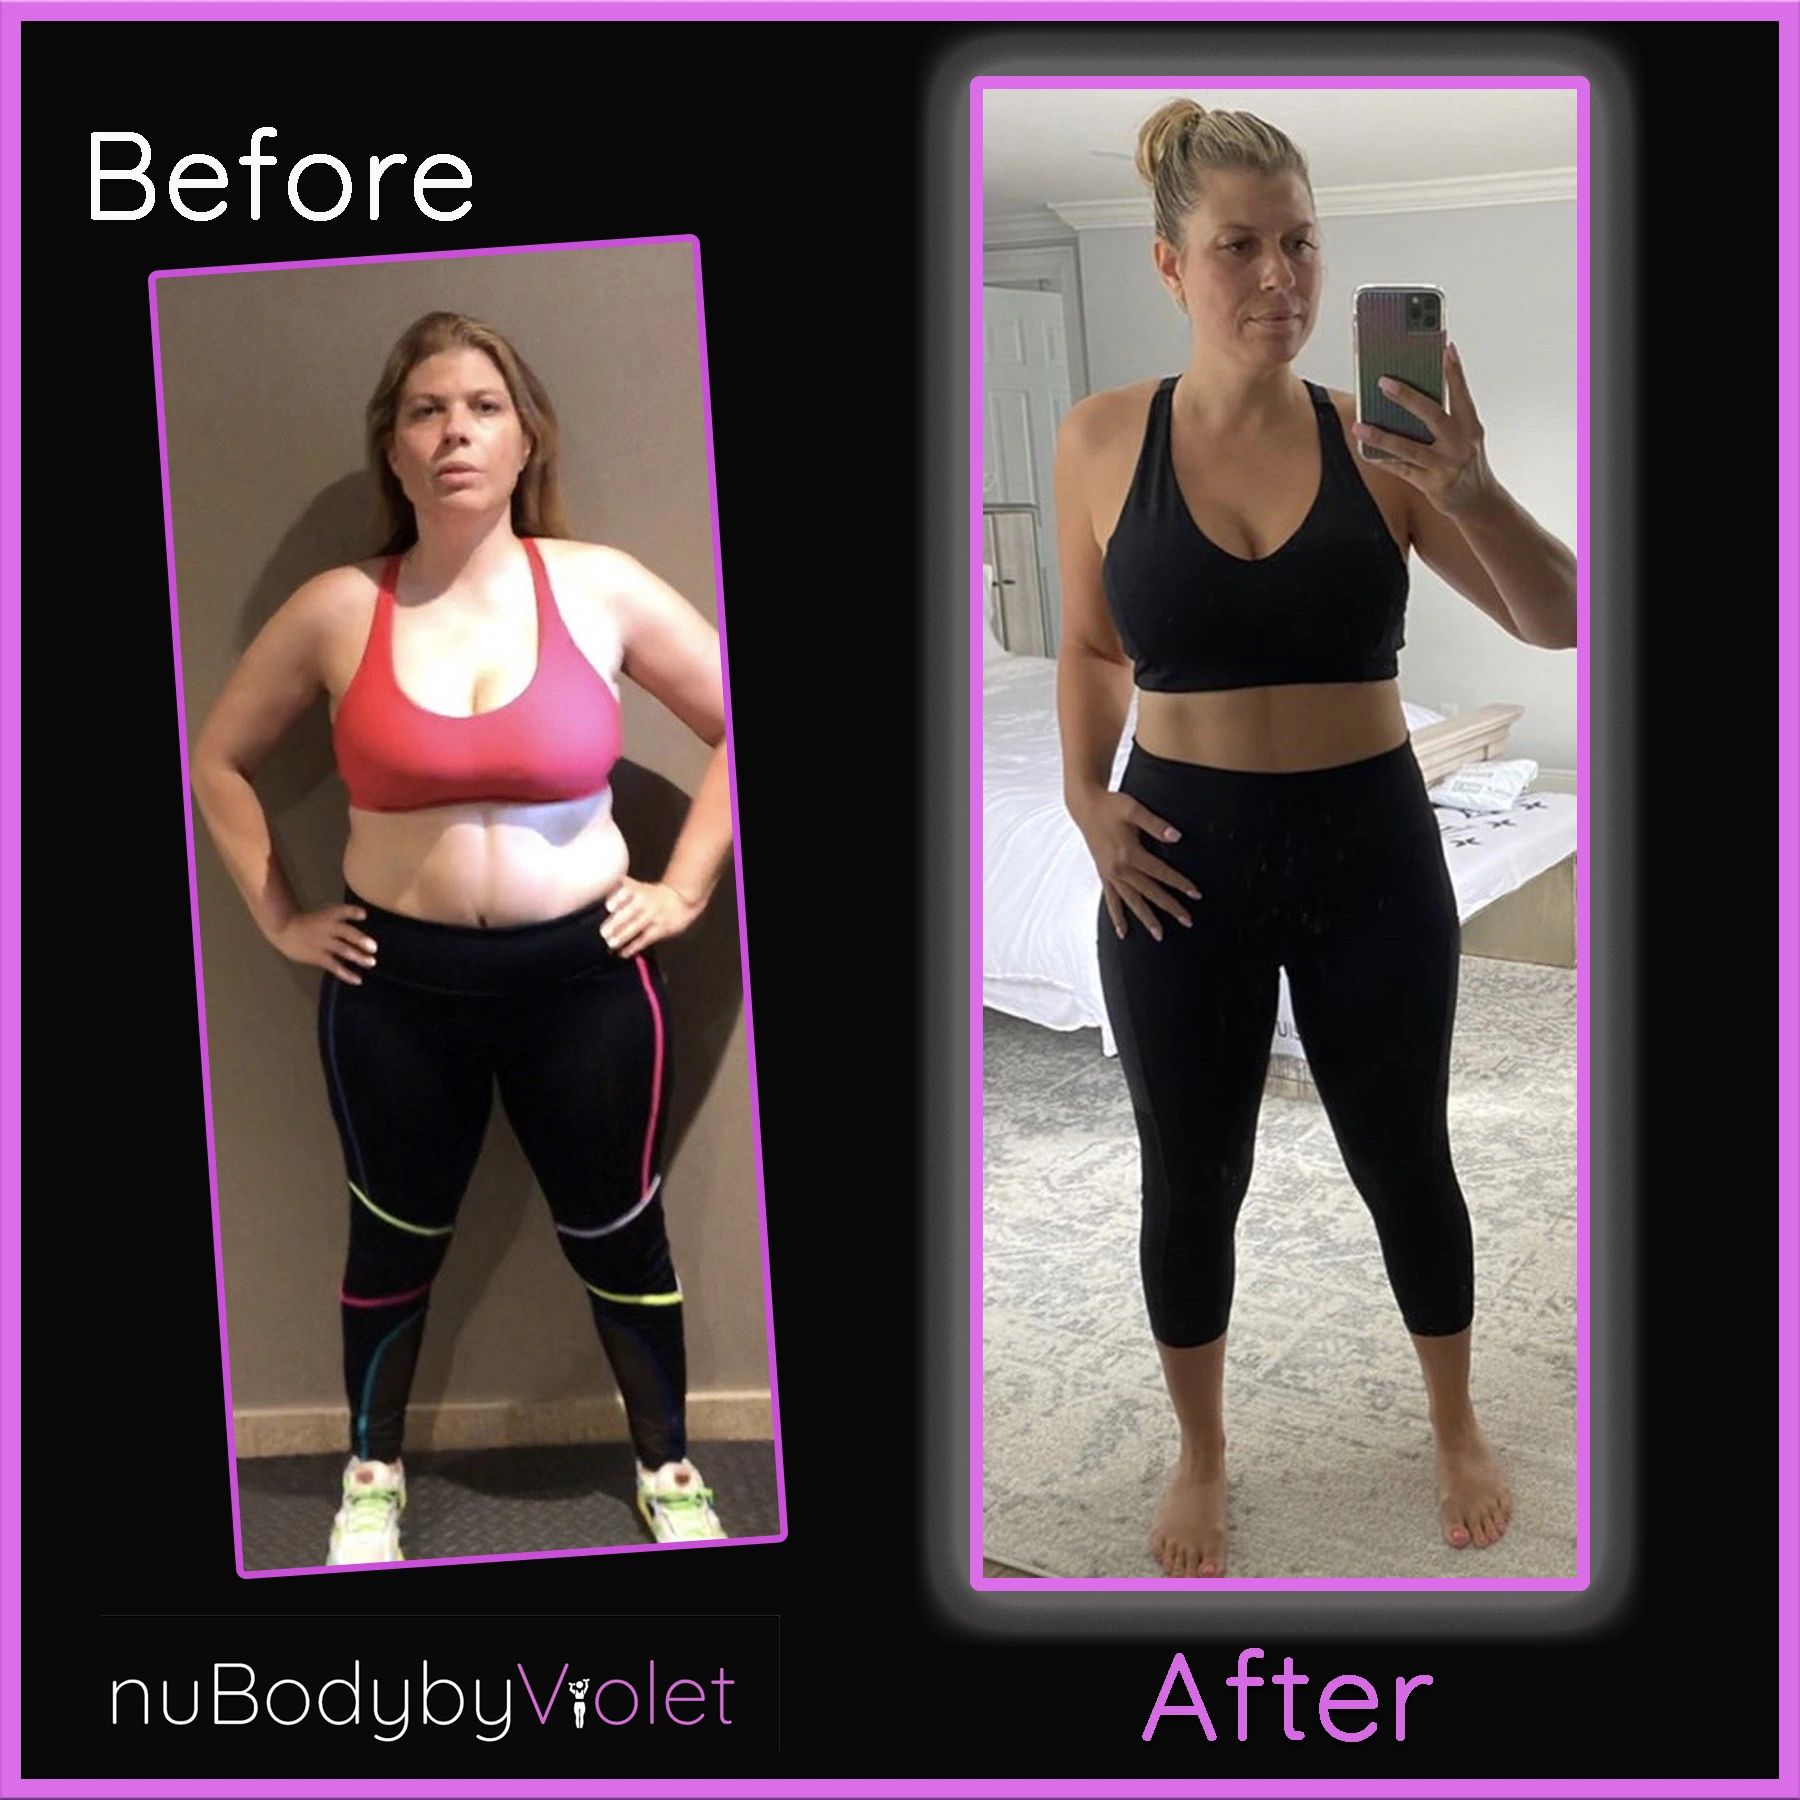 So proud of Shauna! Before and After - half way to her weight loss and fitness goals!